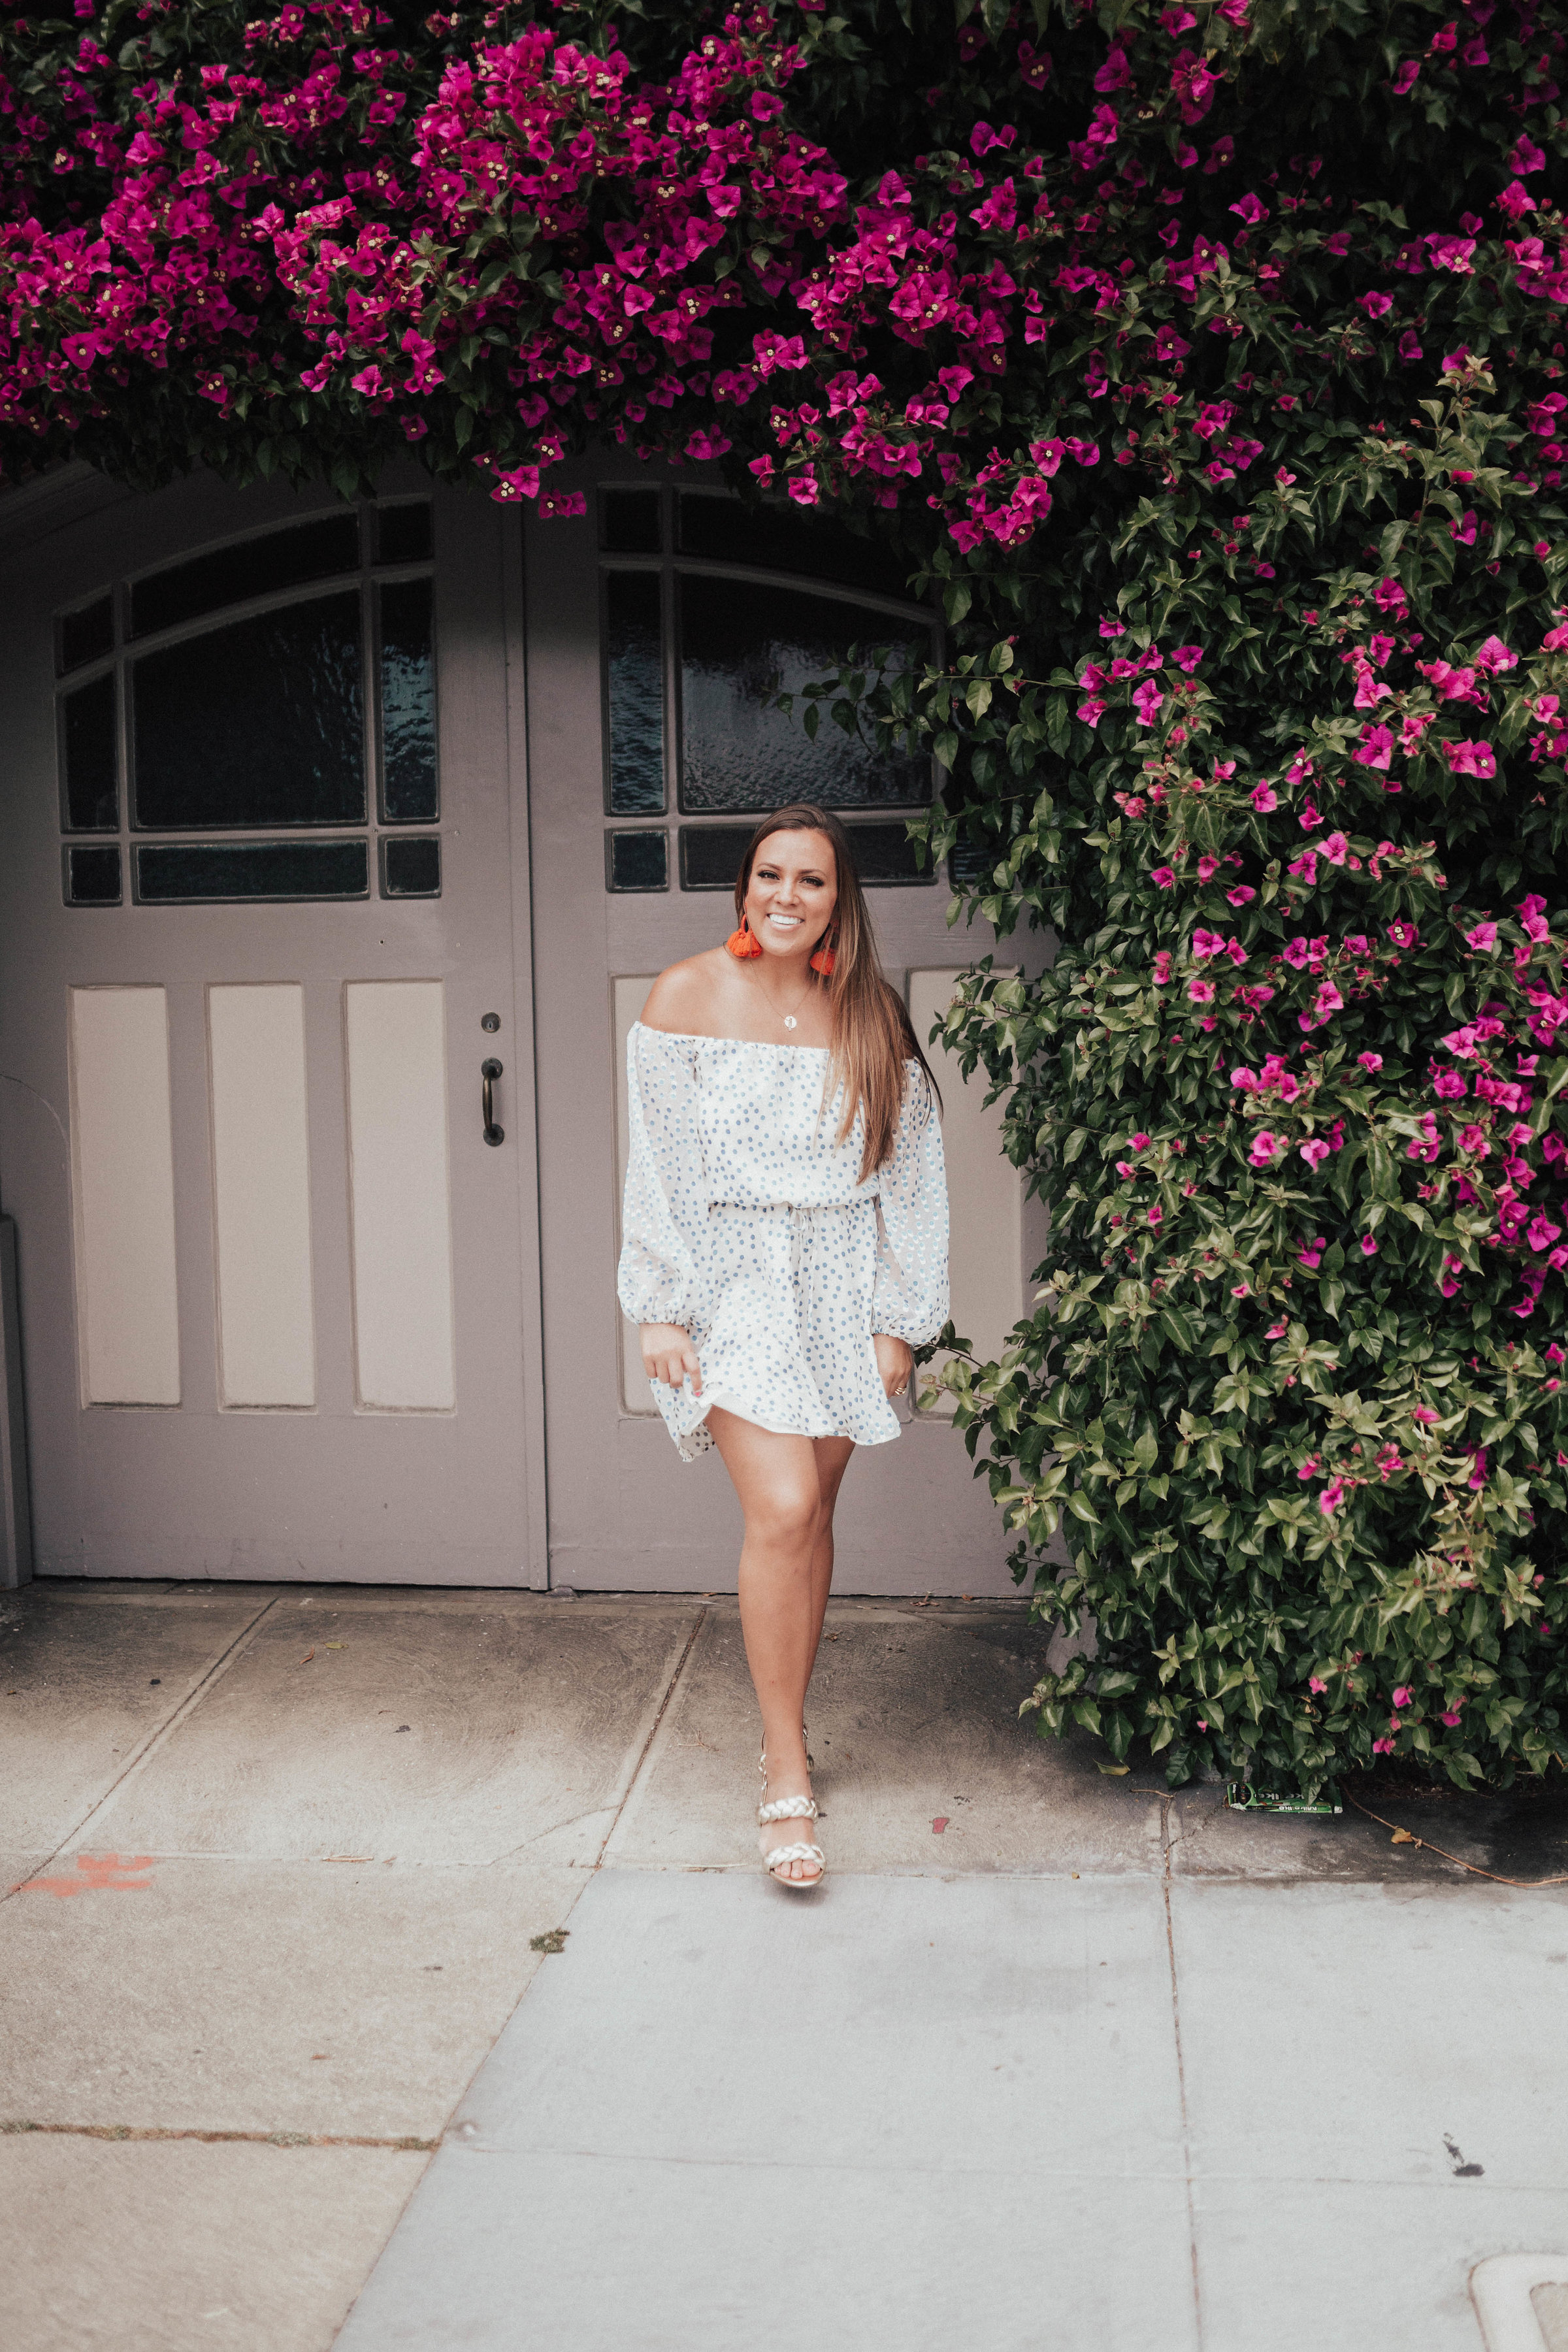 Ashley Zeal from Two Peas in a Prada shares their June Top Ten sellers featuring their best selling items from the month of June including this polka dot dress!